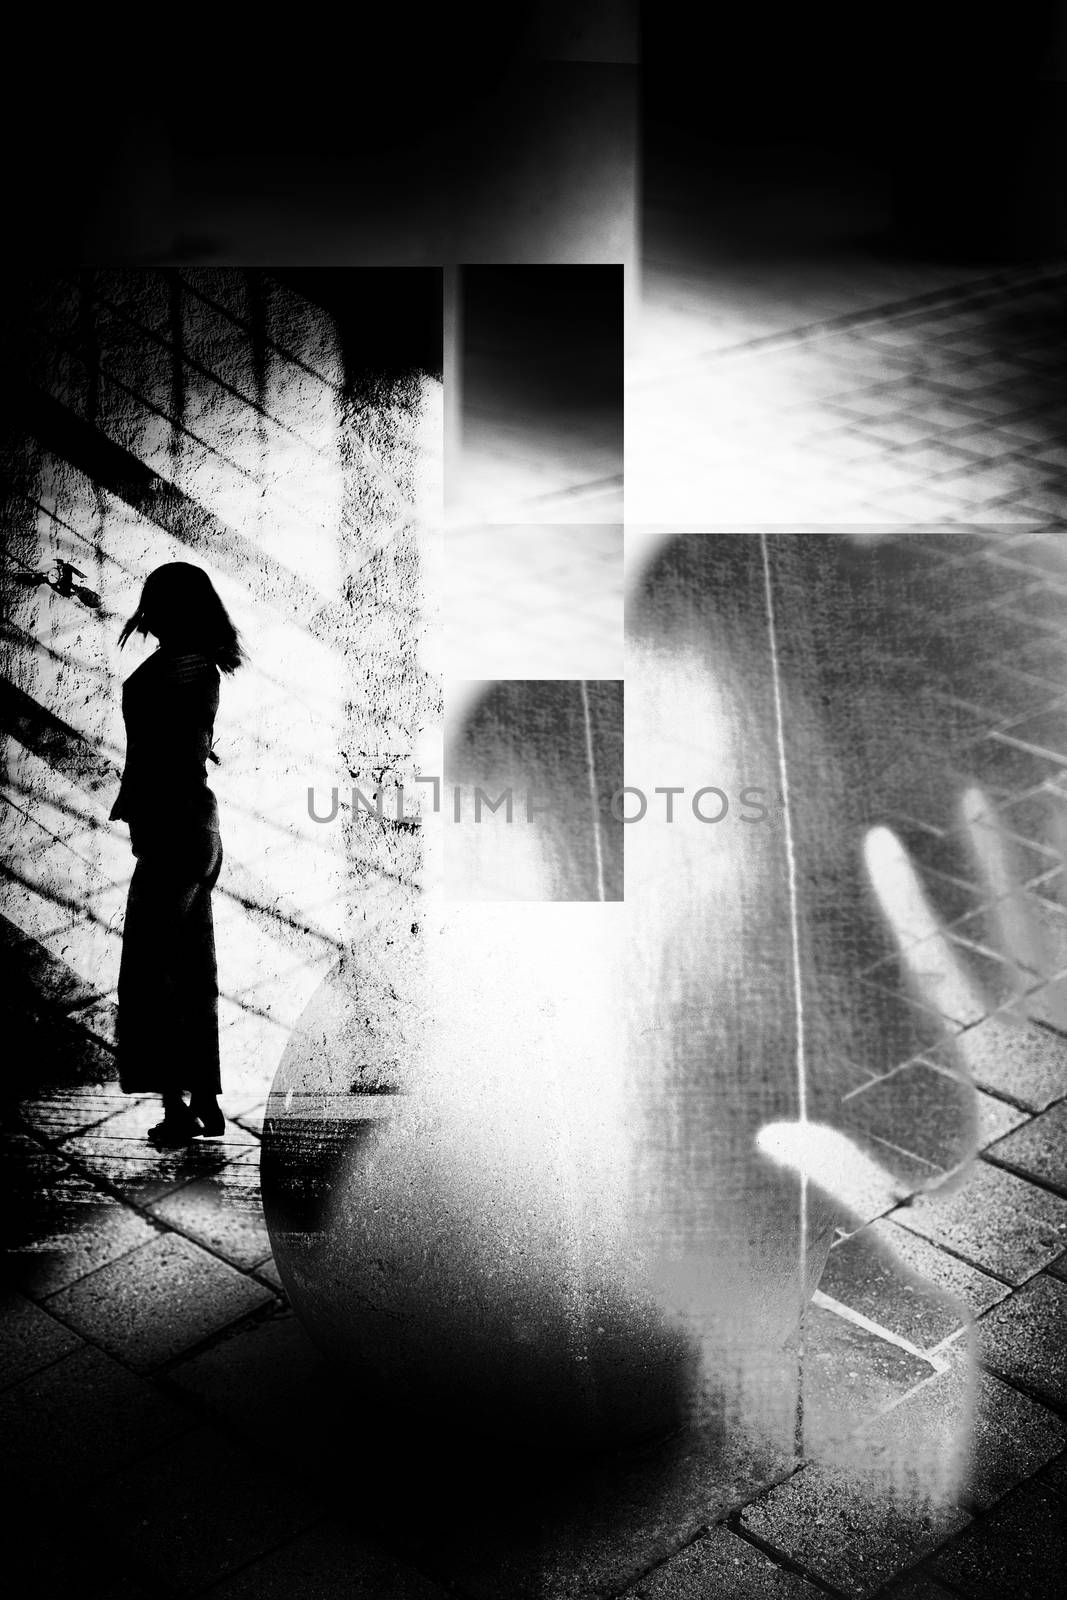 Artistic surreal black and white rough textured collage of silhouette of woman in urban environment.